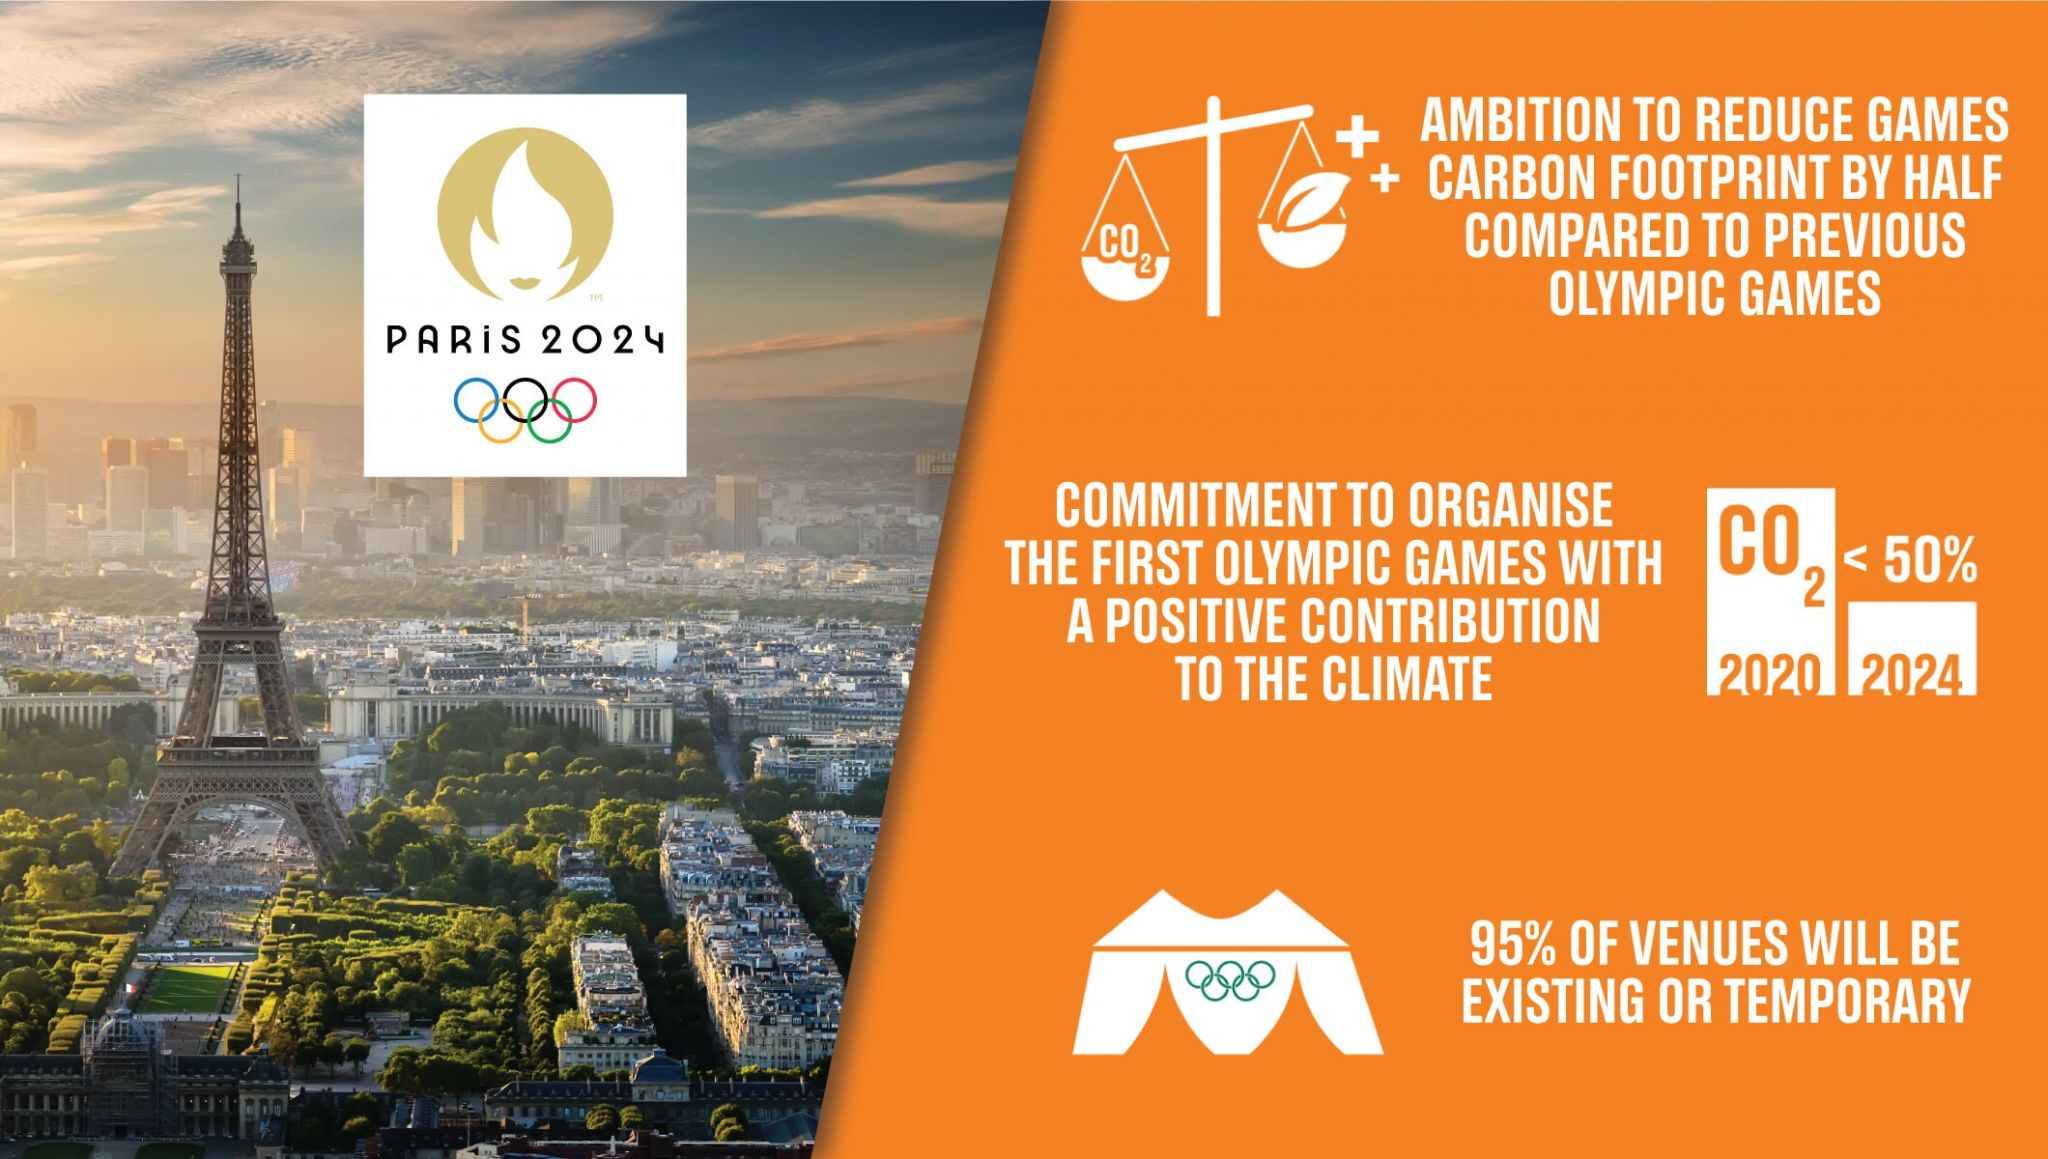 Paris 2024 organisers plan to halve the levels of carbon emissions in comparison to the London 2012 and Rio 2016 Games ©Paris 2024